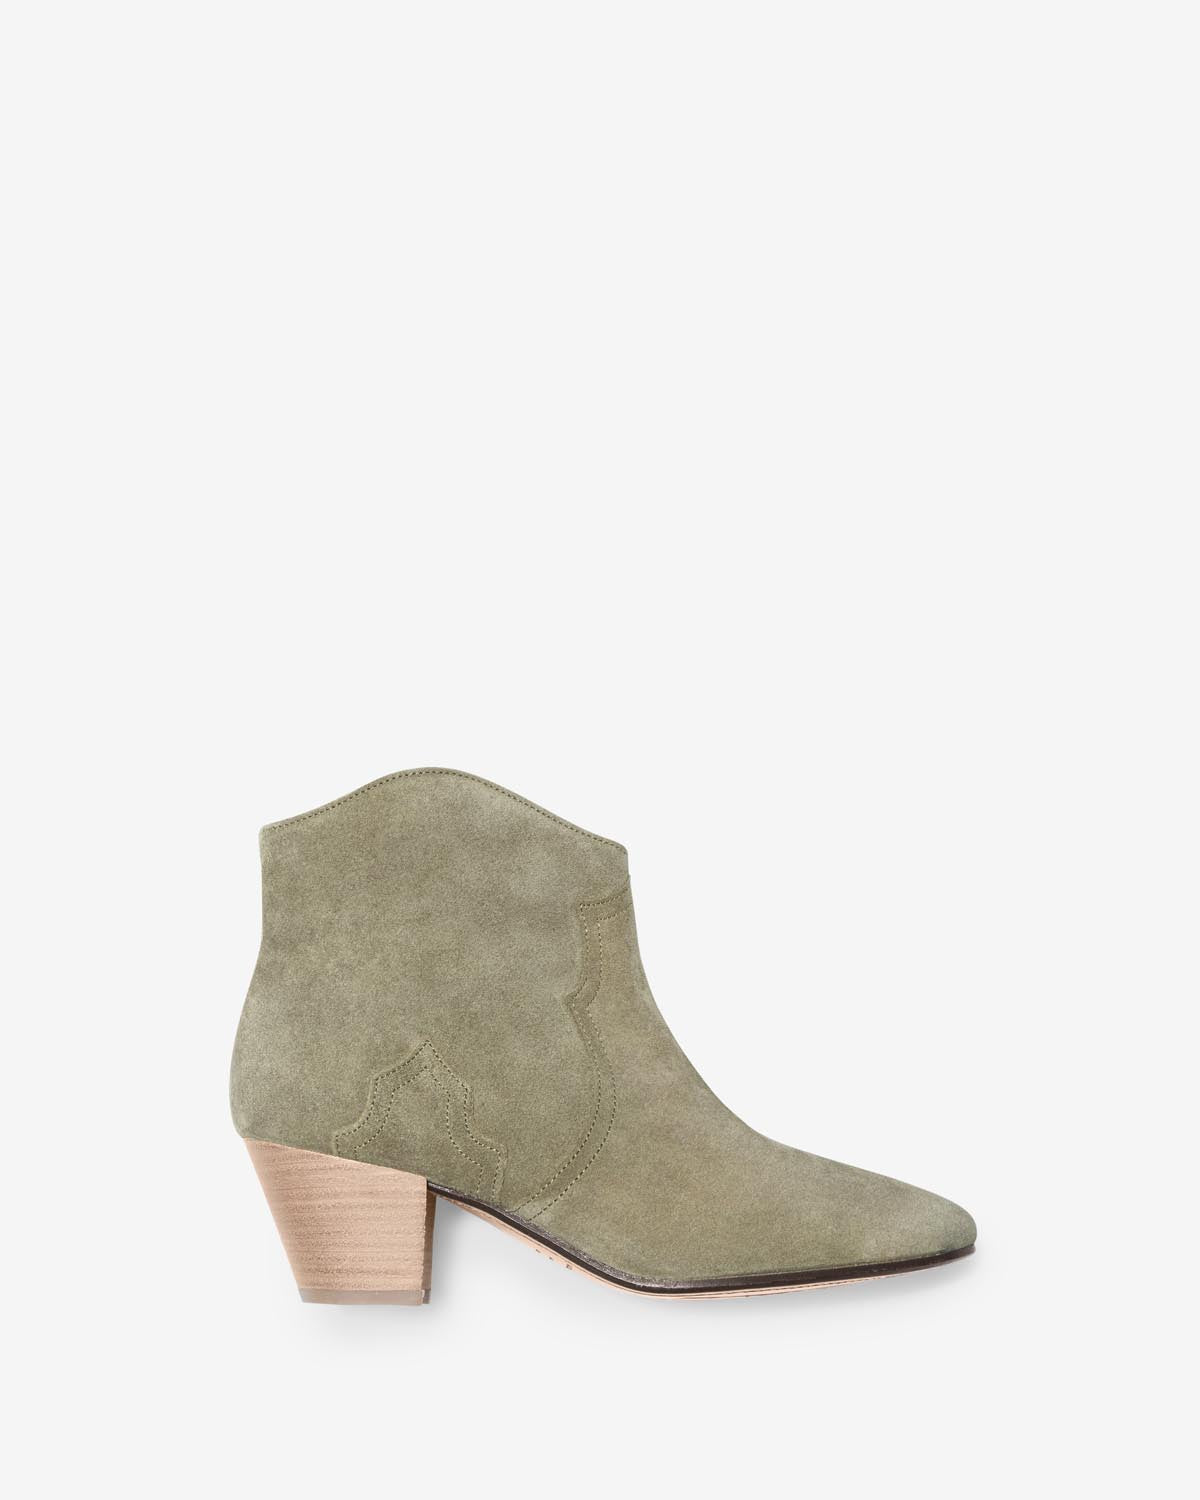 Boots dicker Woman Taupe 4